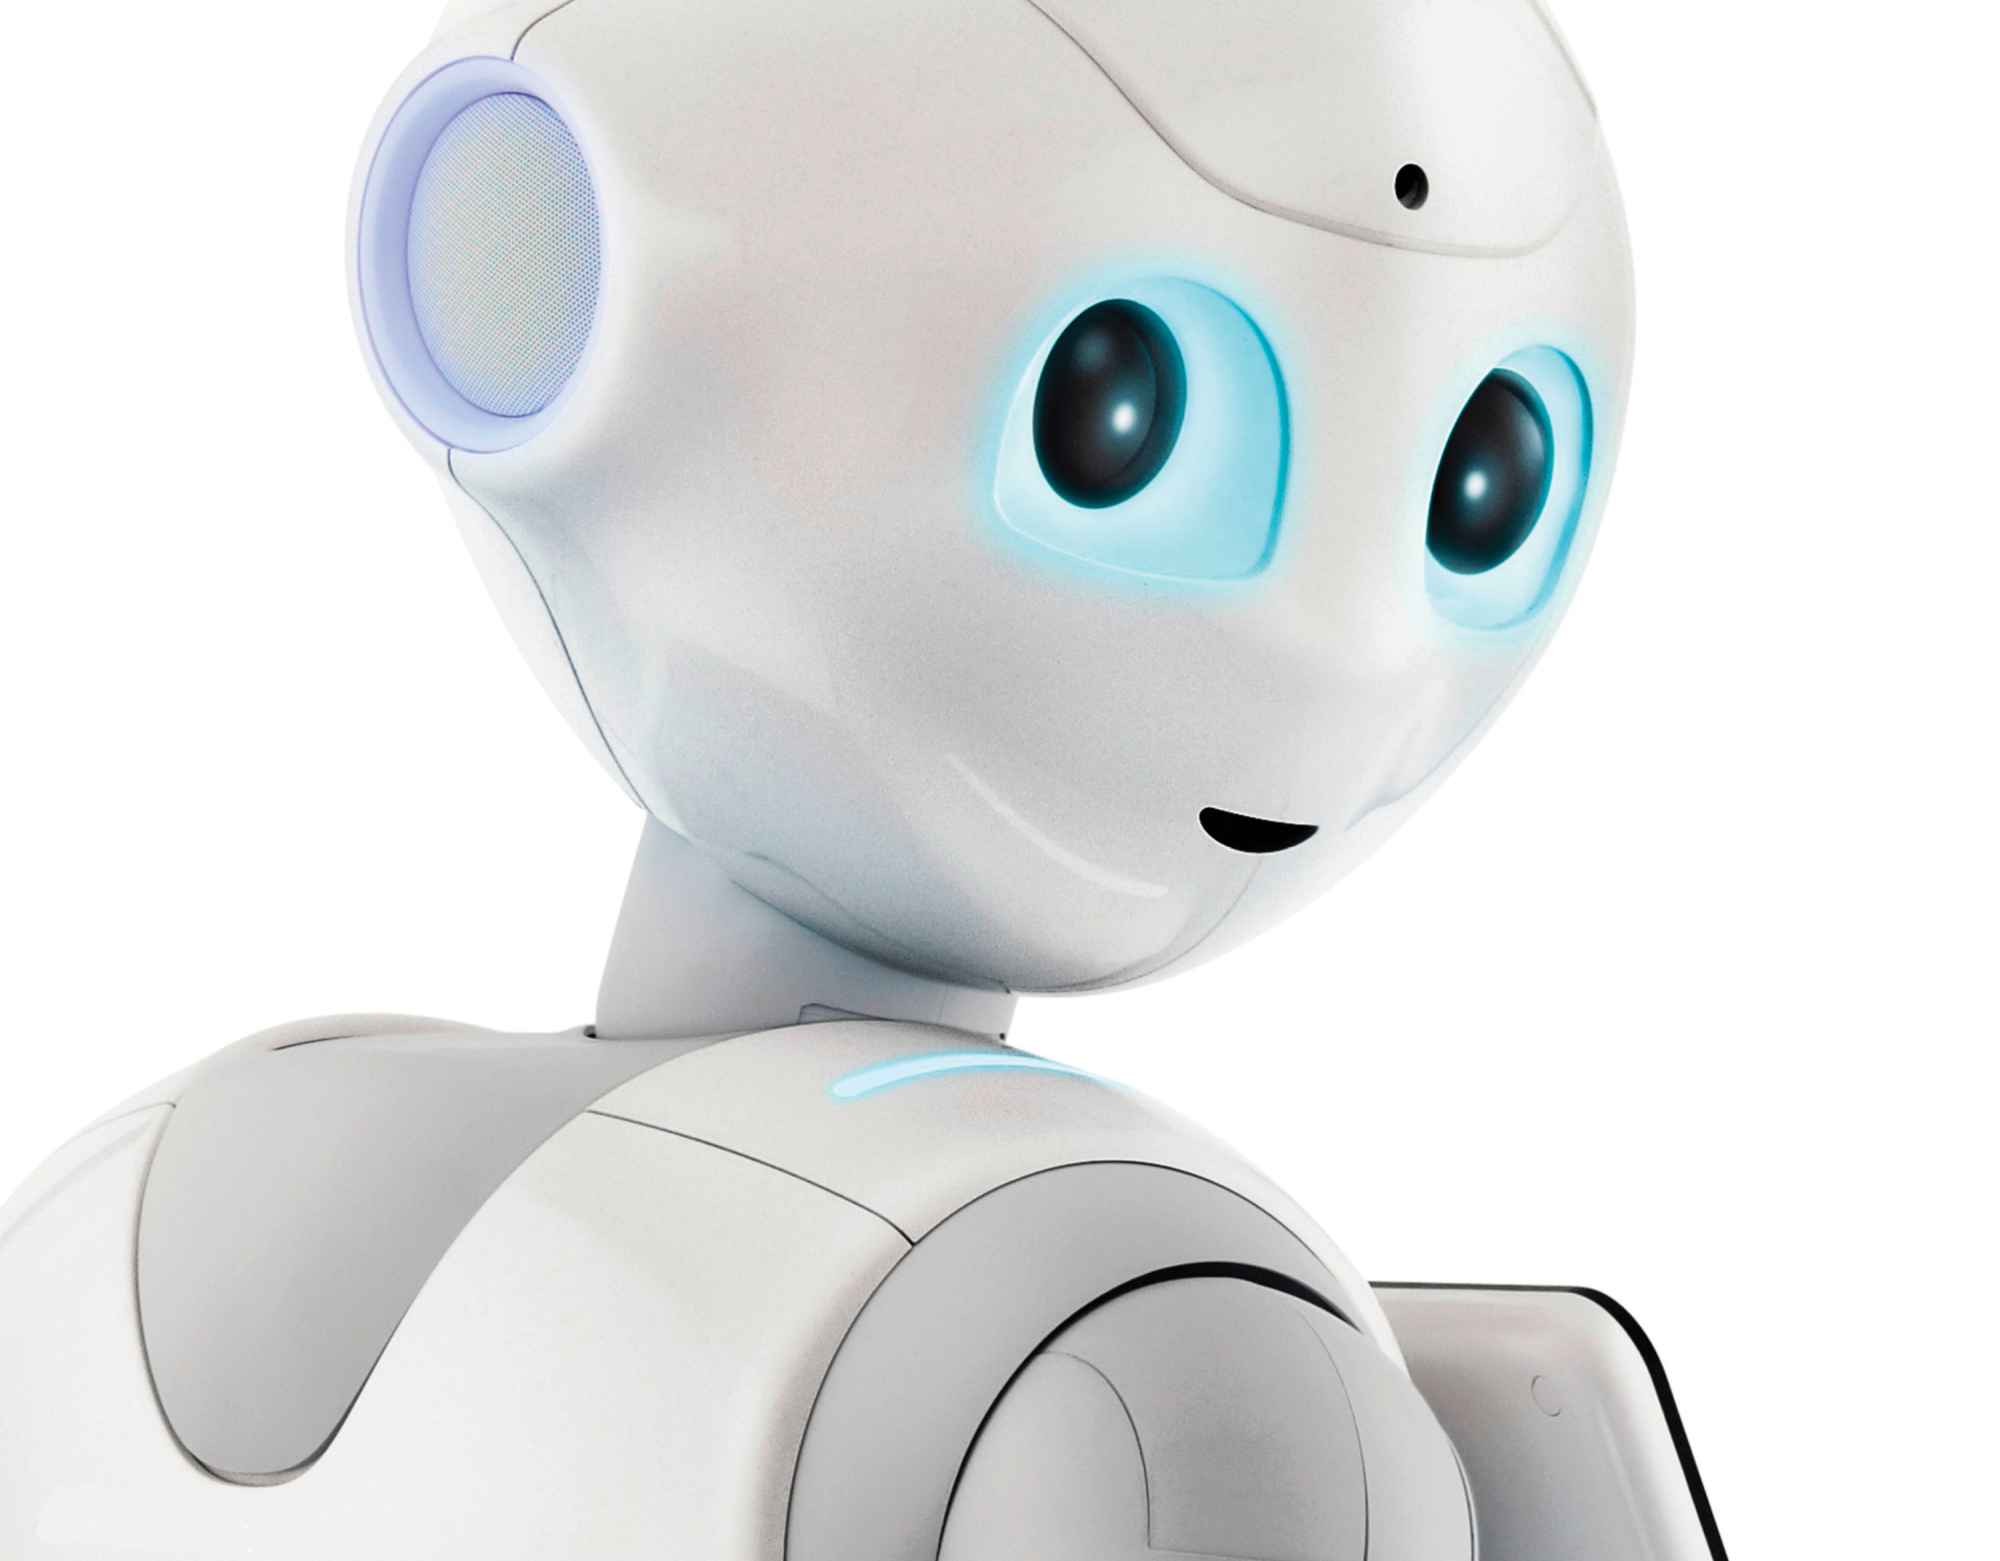 Alibaba and invest SoftBank's robotics business | Post & Parcel